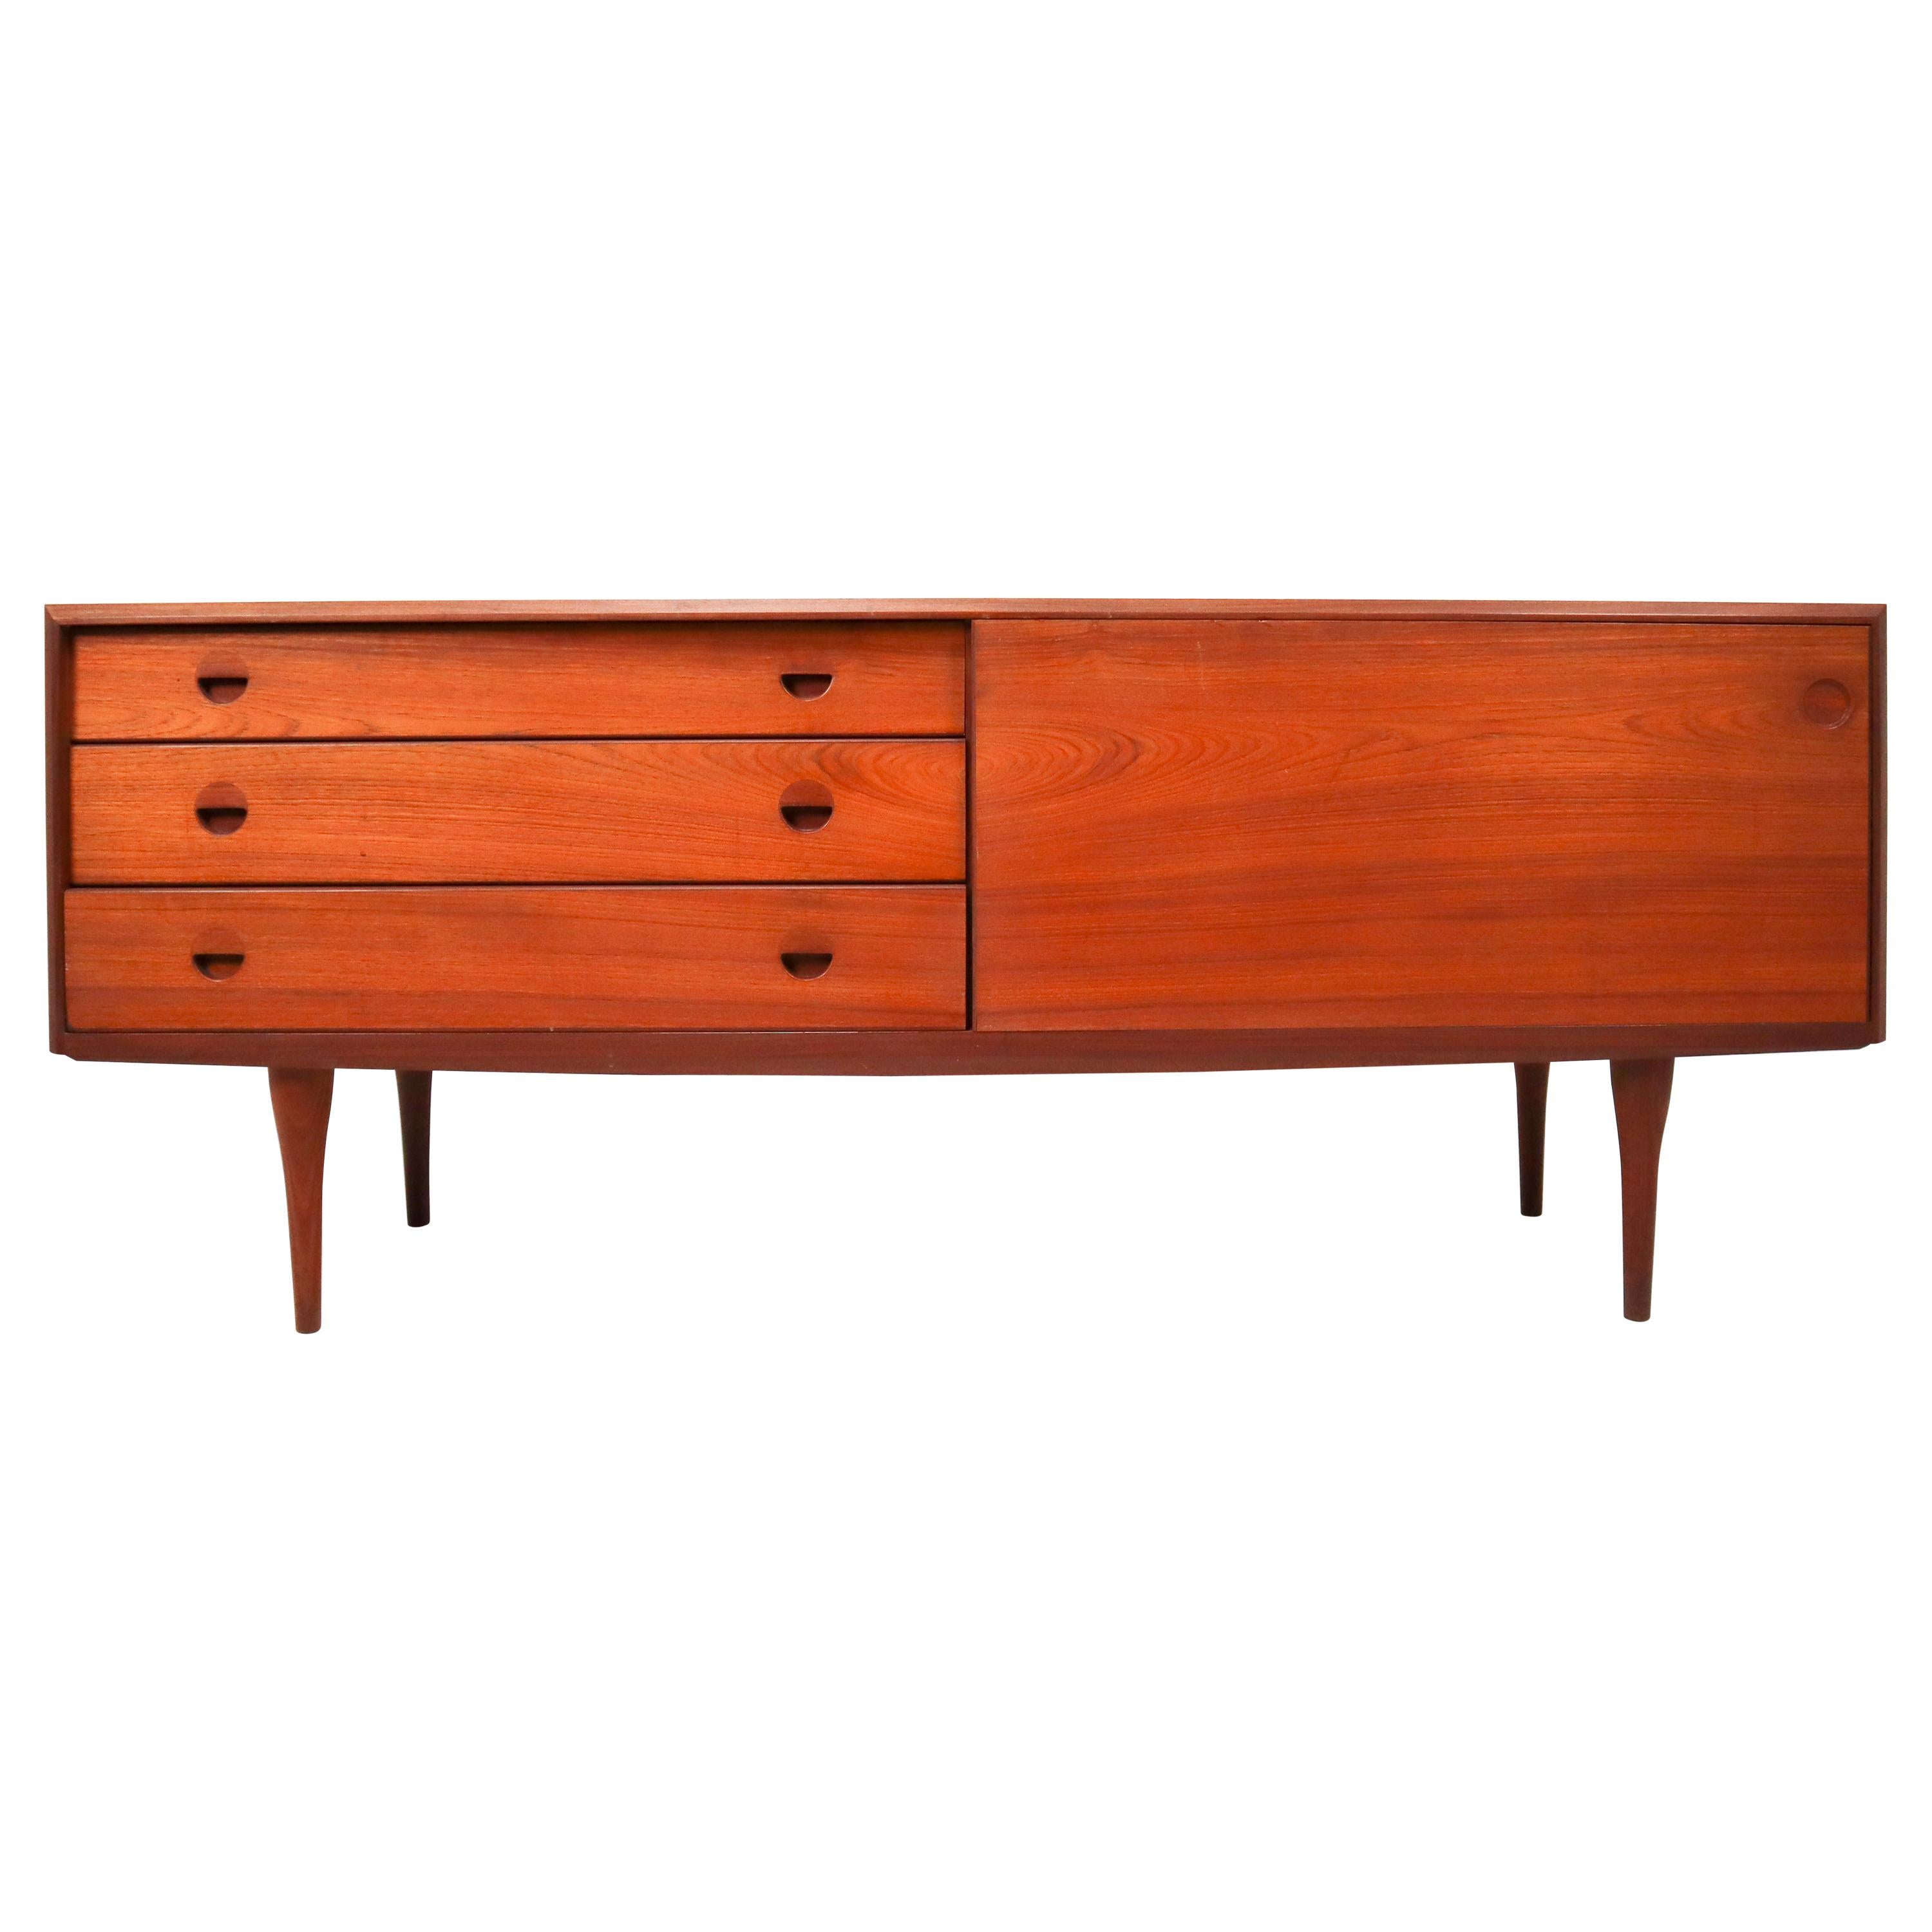 Striking Teak Sideboard/Credenza from the 1960s, Made in Denmark